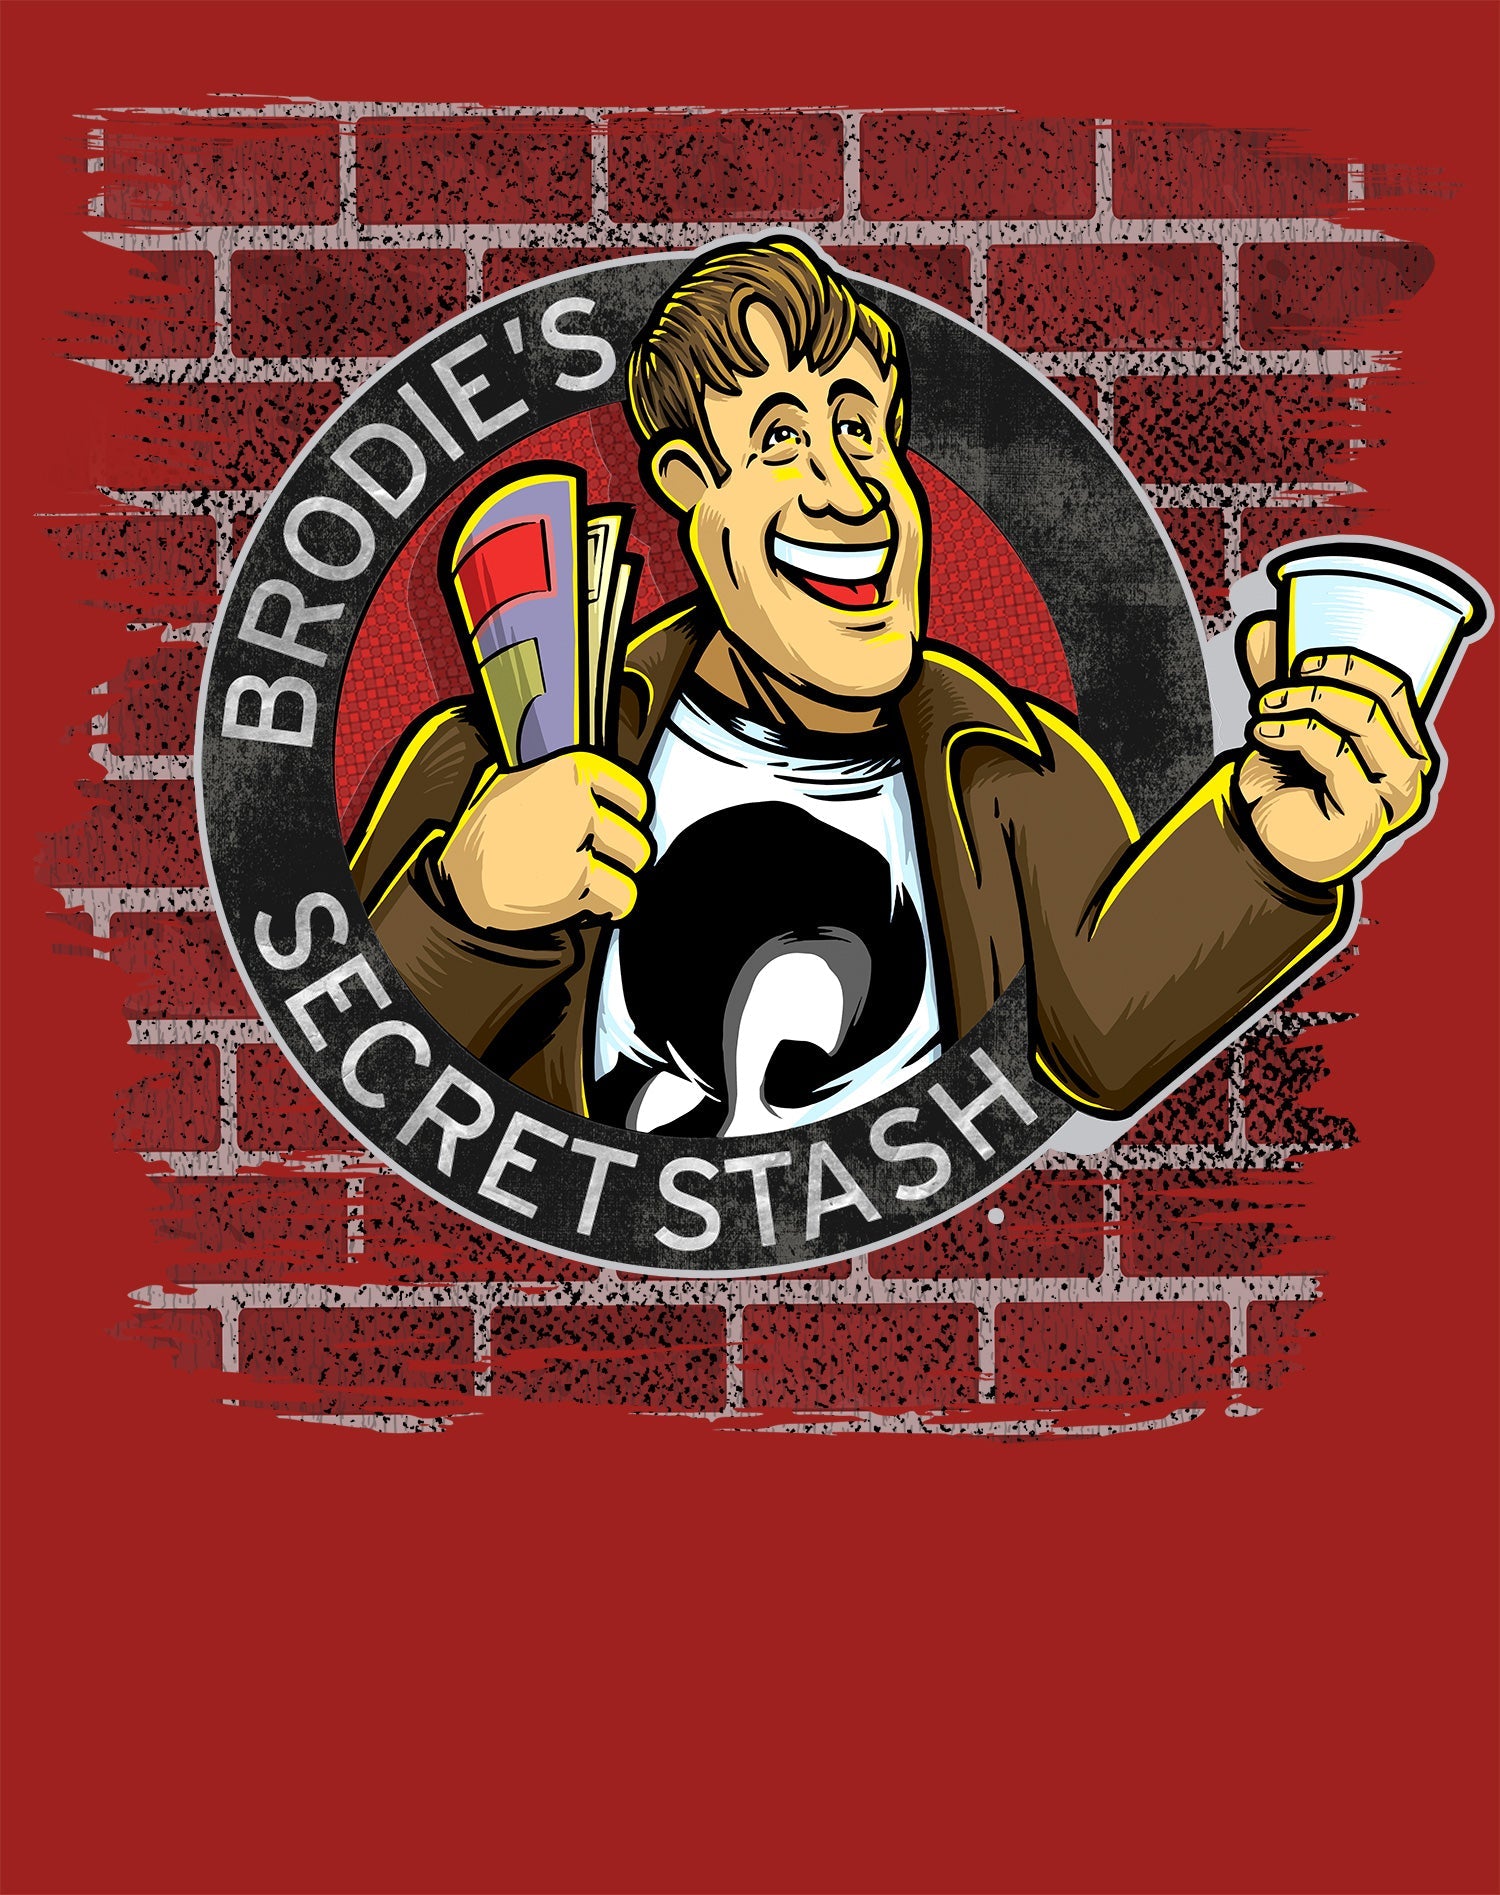 Kevin Smith Jay & Silent Bob Reboot Brodie's Secret Stash Store Logo Wall Official Men's T-Shirt